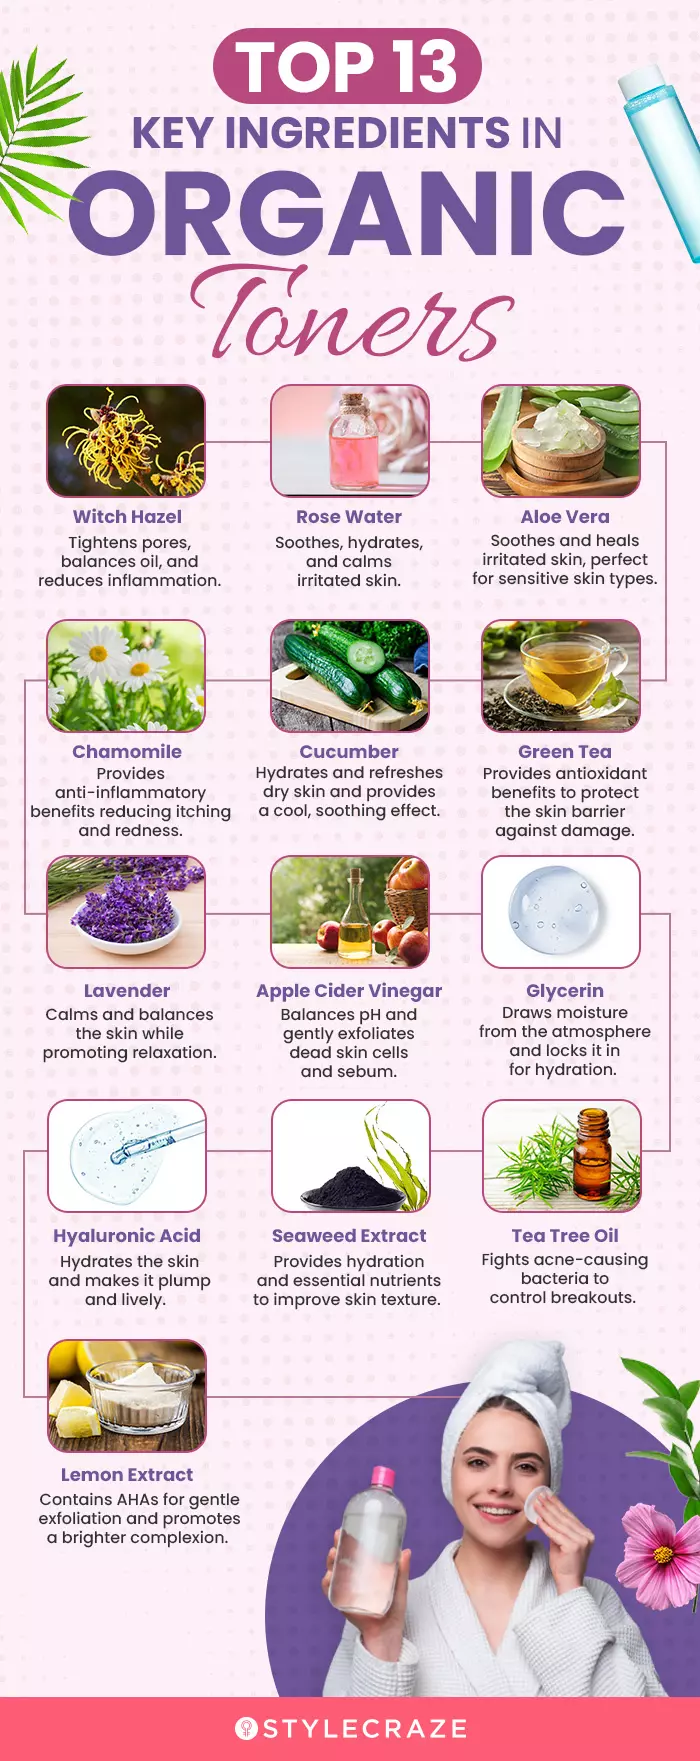 Top 13 Key Ingredients In Organic Toners (infographic)